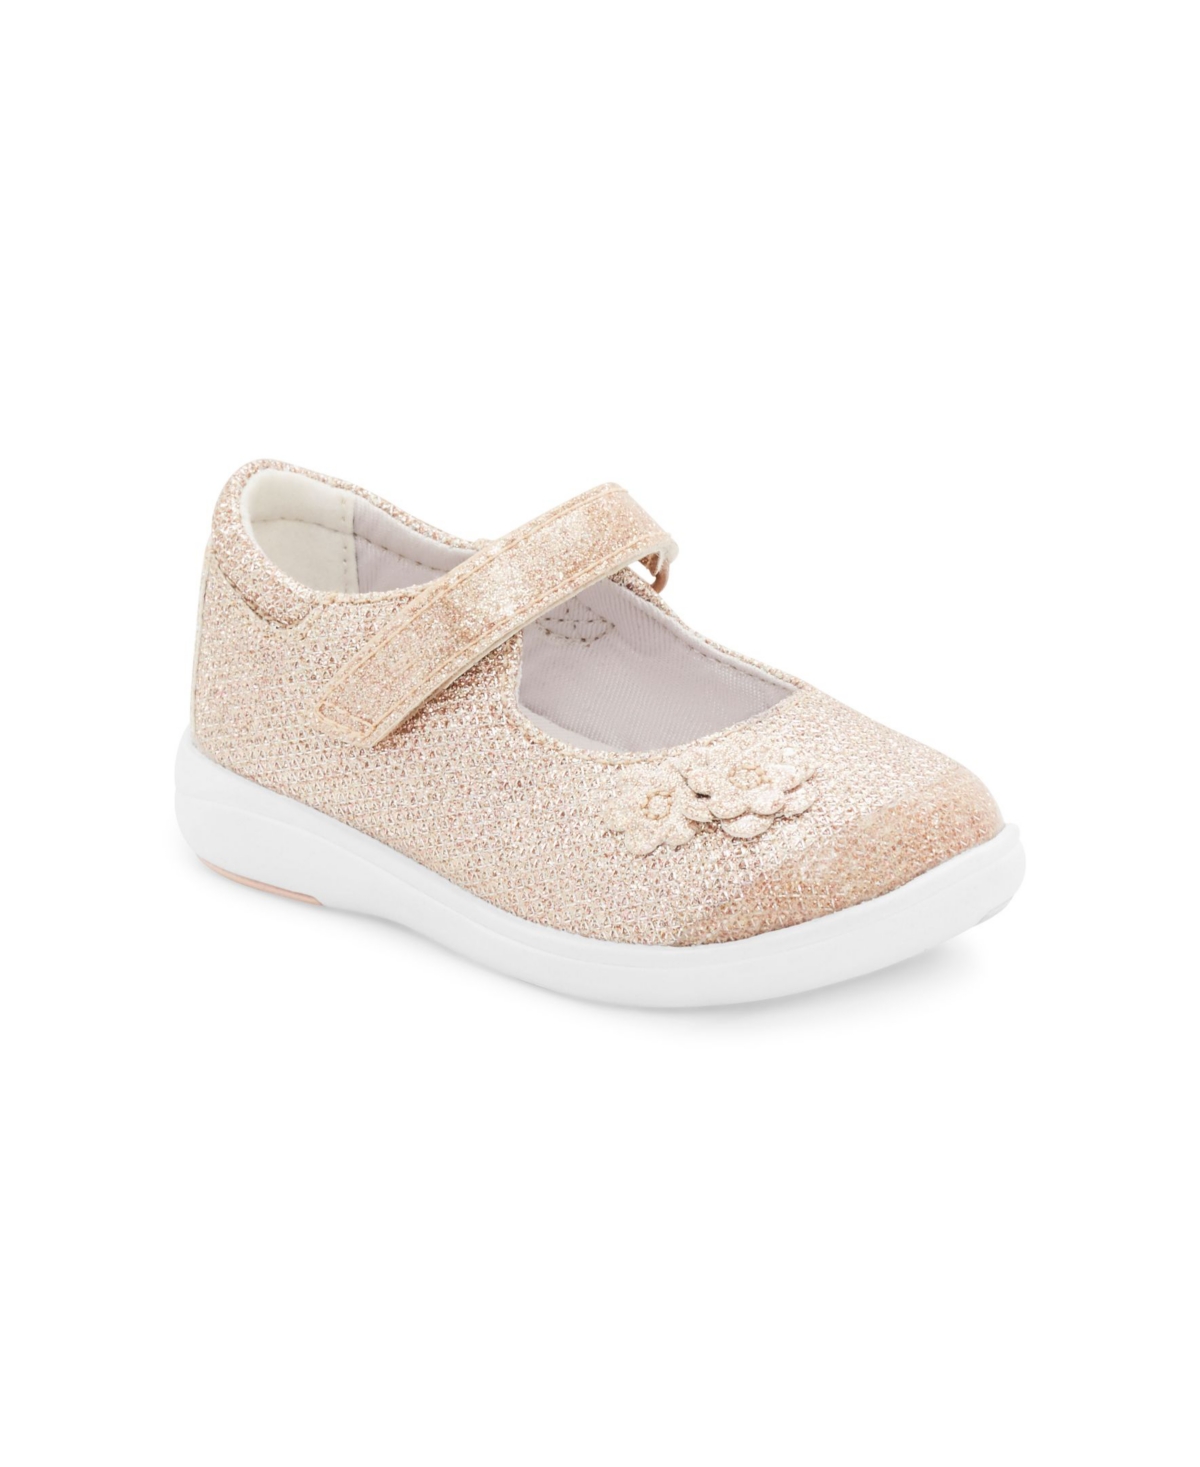 STRIDE RITE BABY GIRLS HOLLY MARY JANE SHOES